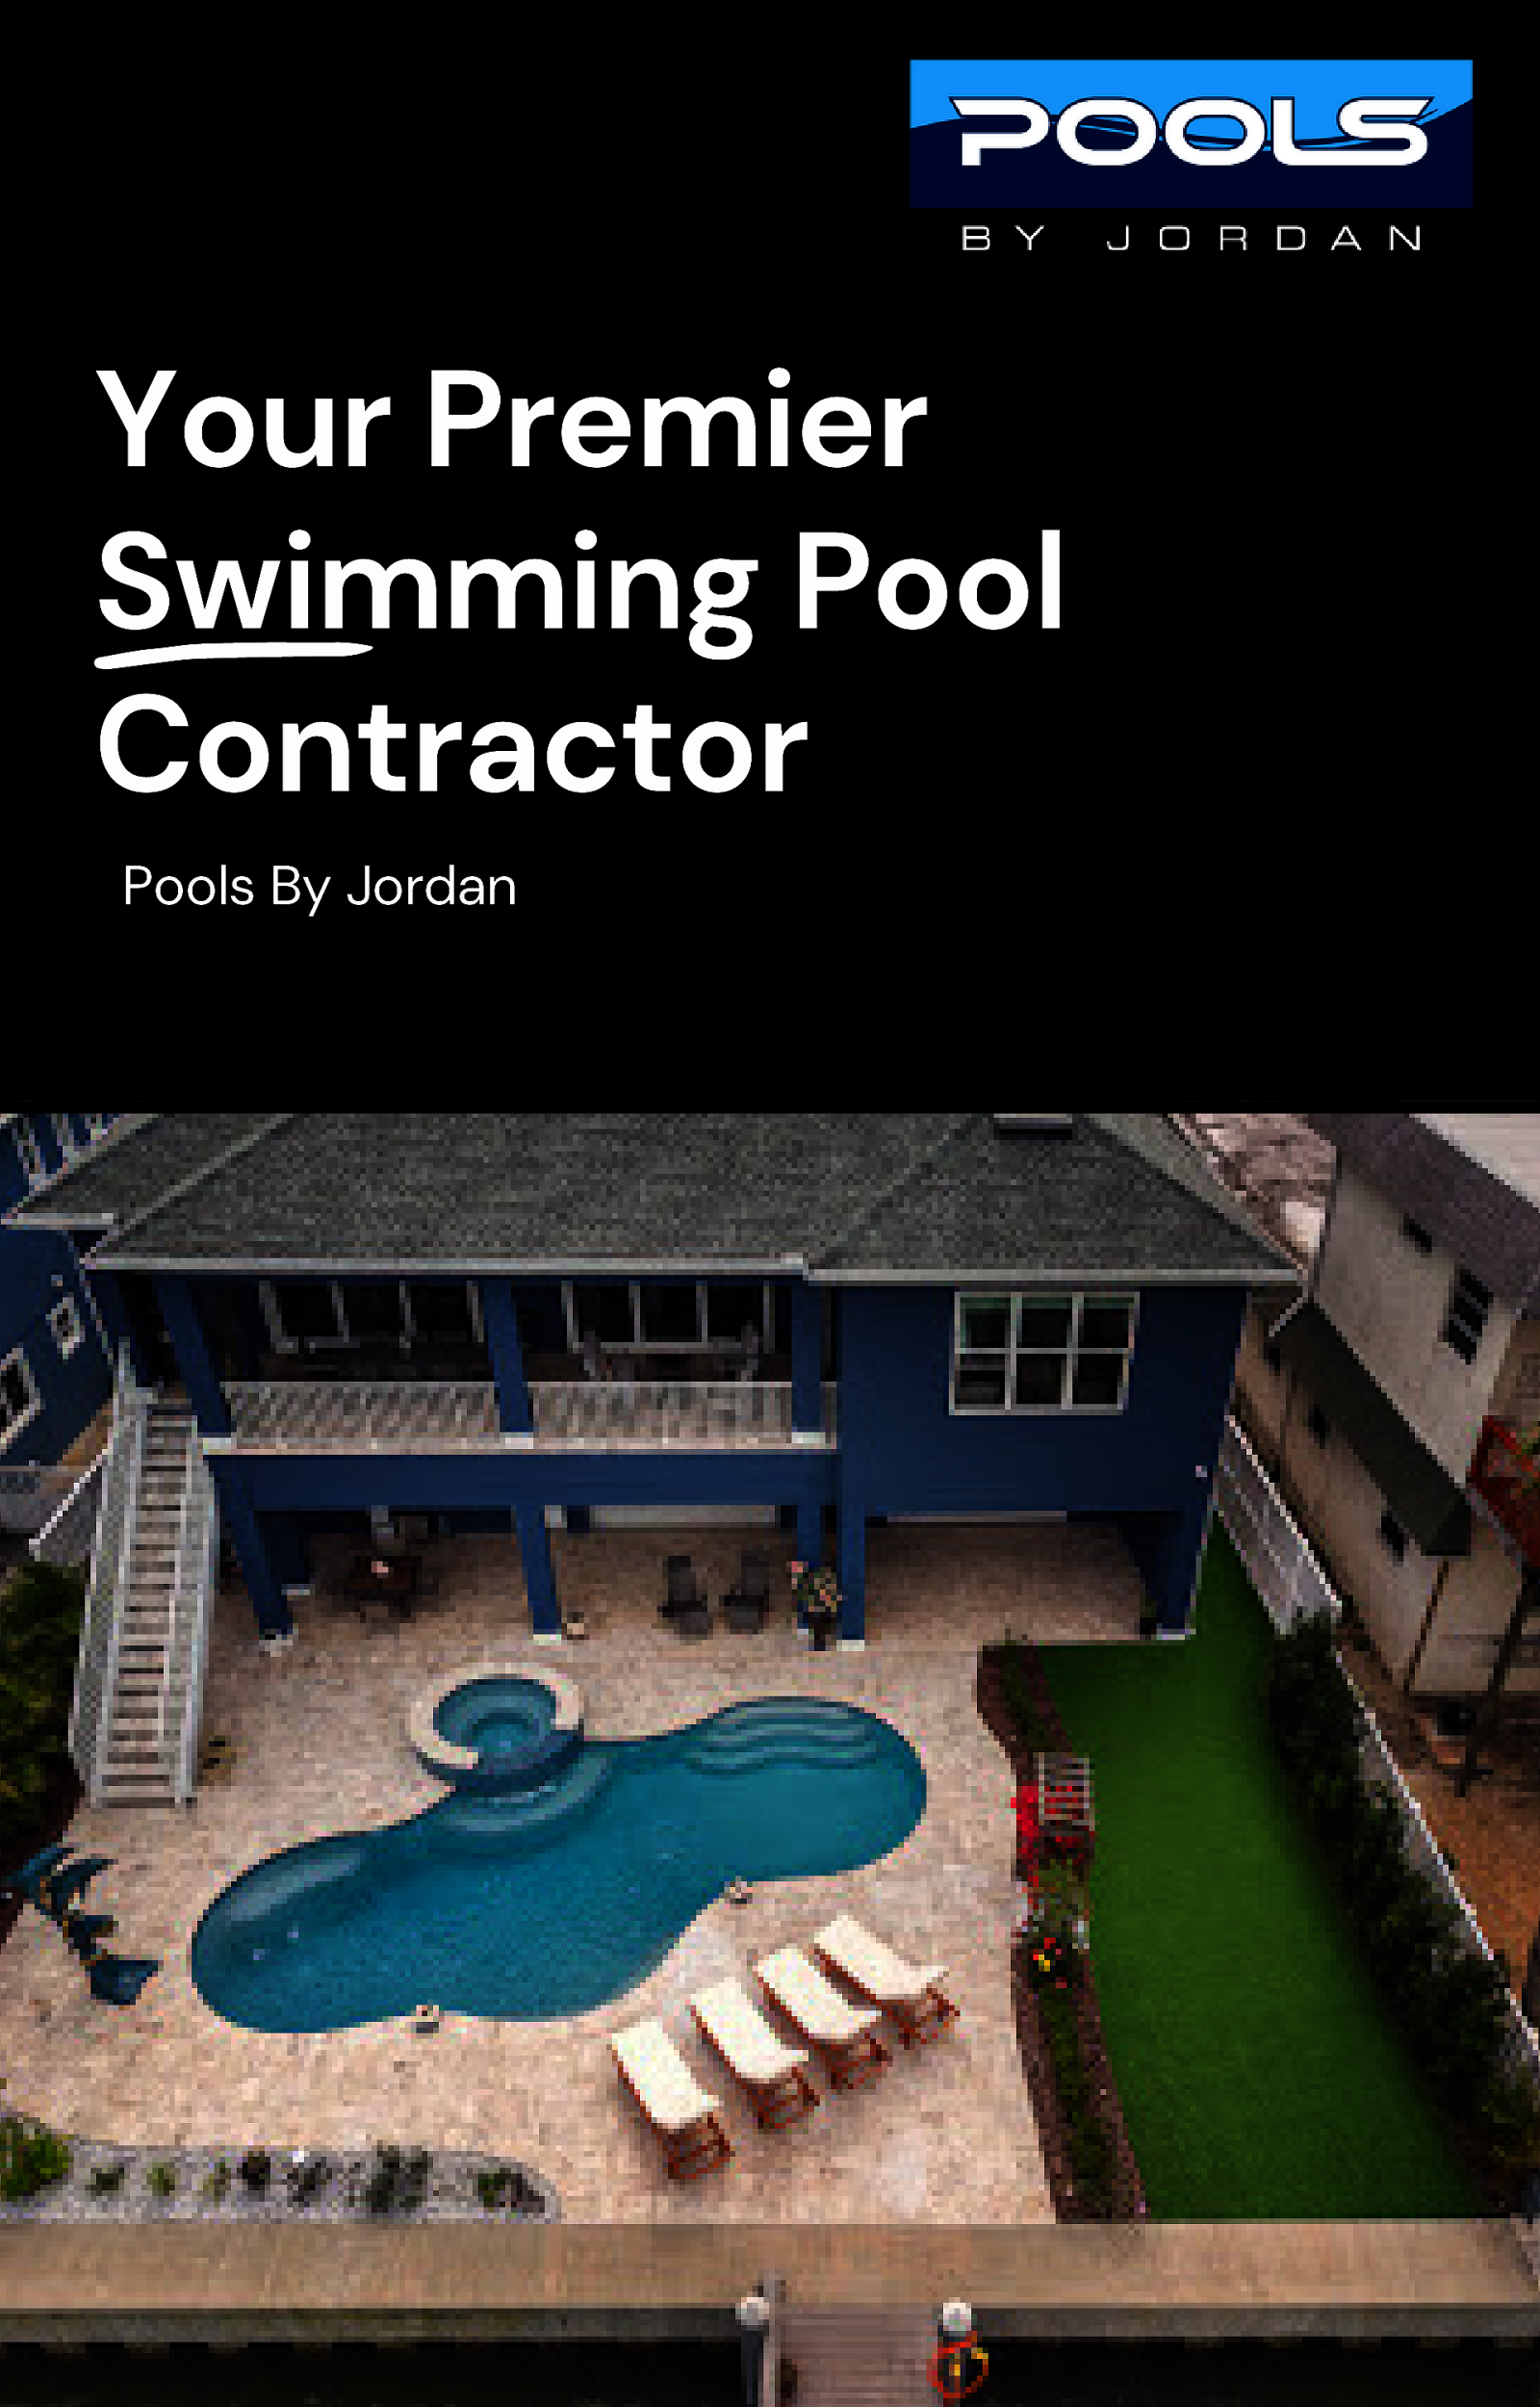 Pools by Jordan Largo FL: Your Premier Swimming Pool Contractor